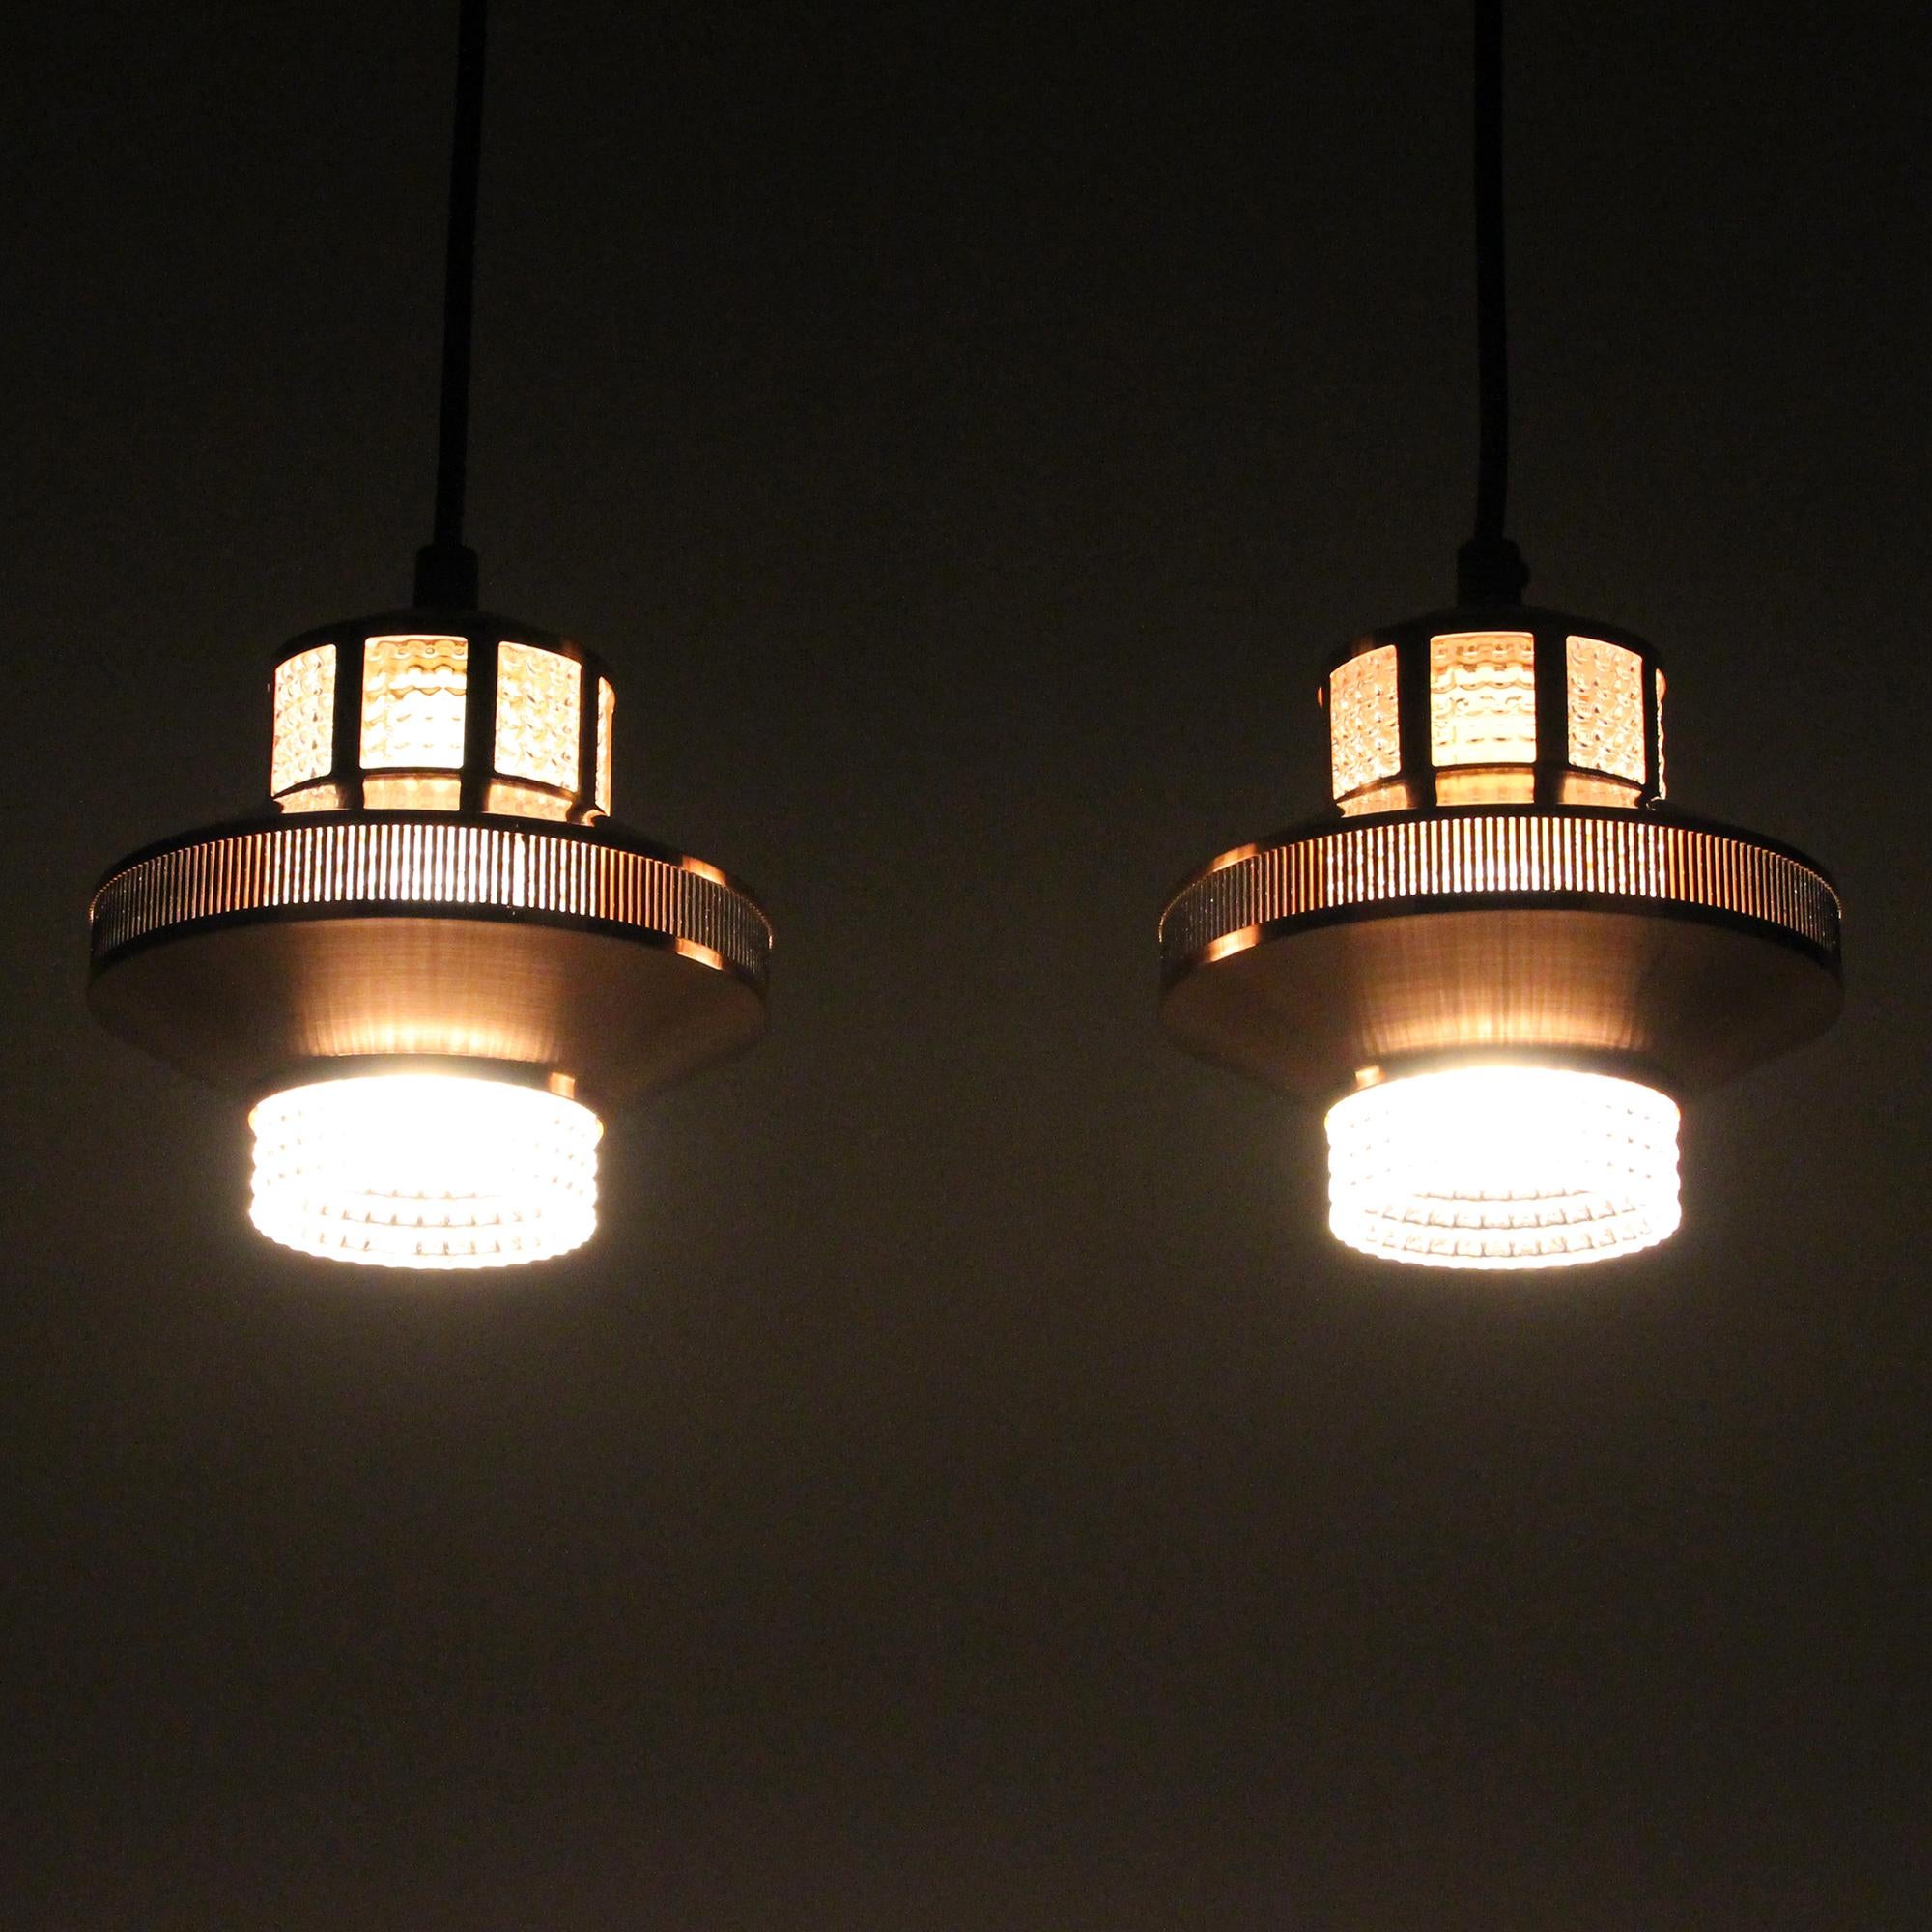 Polished Copper & Glass Pendant Lights, 1960s, Pair of Beautiful Danish Copper and Presse